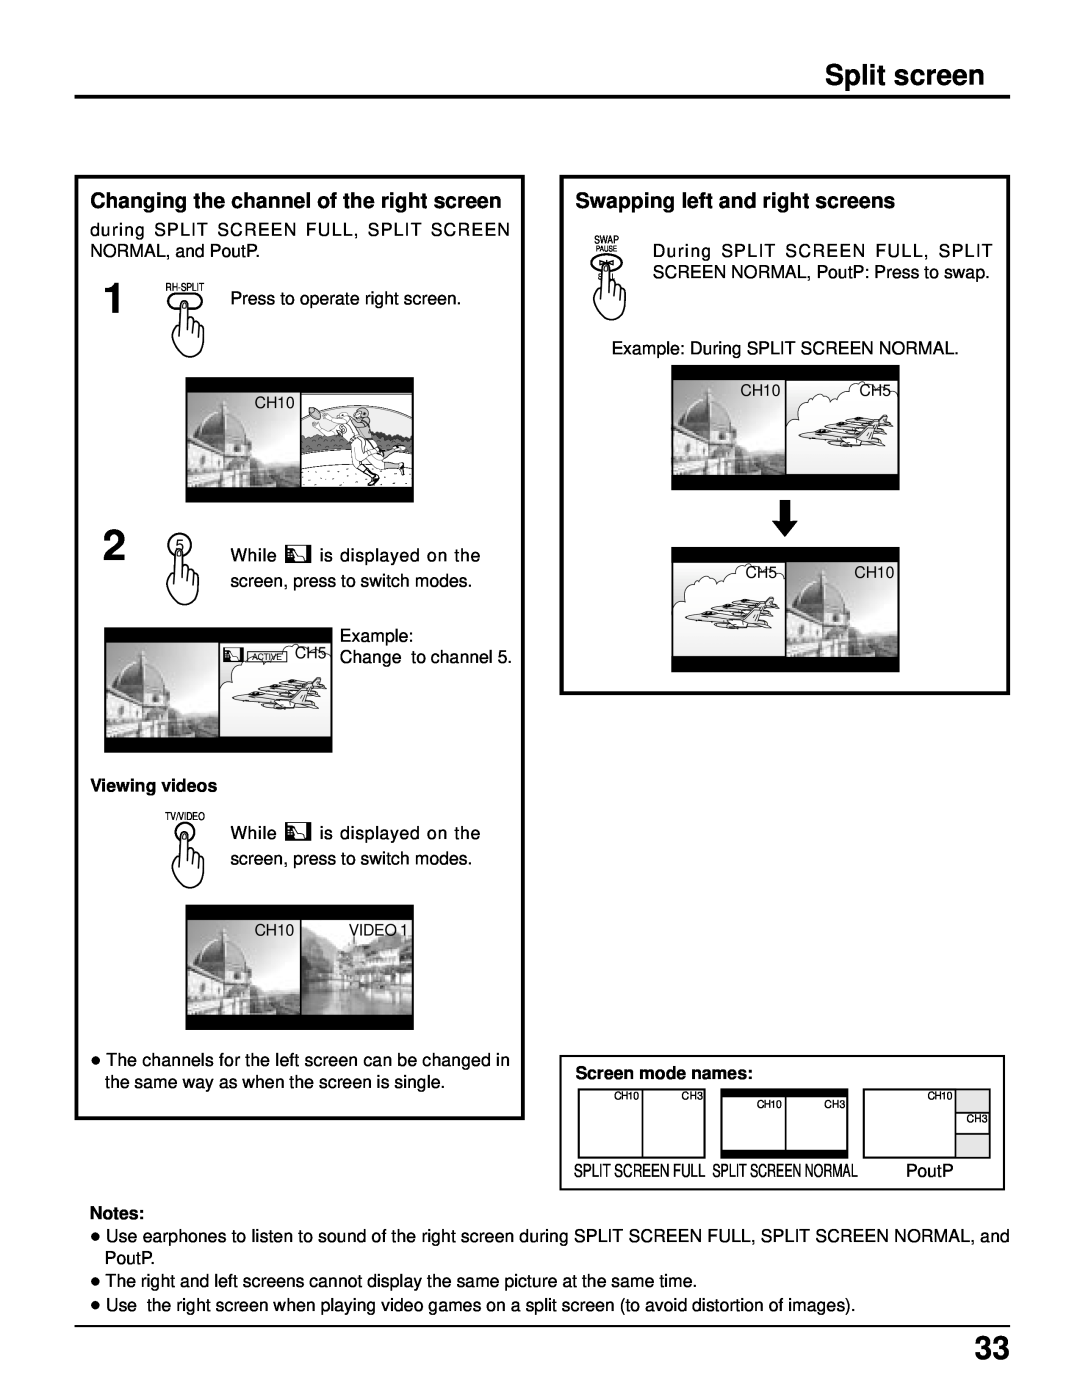 Panasonic CT 34WX50 manual Split screen, Changing the channel of the right screen, Swapping left and right screens 